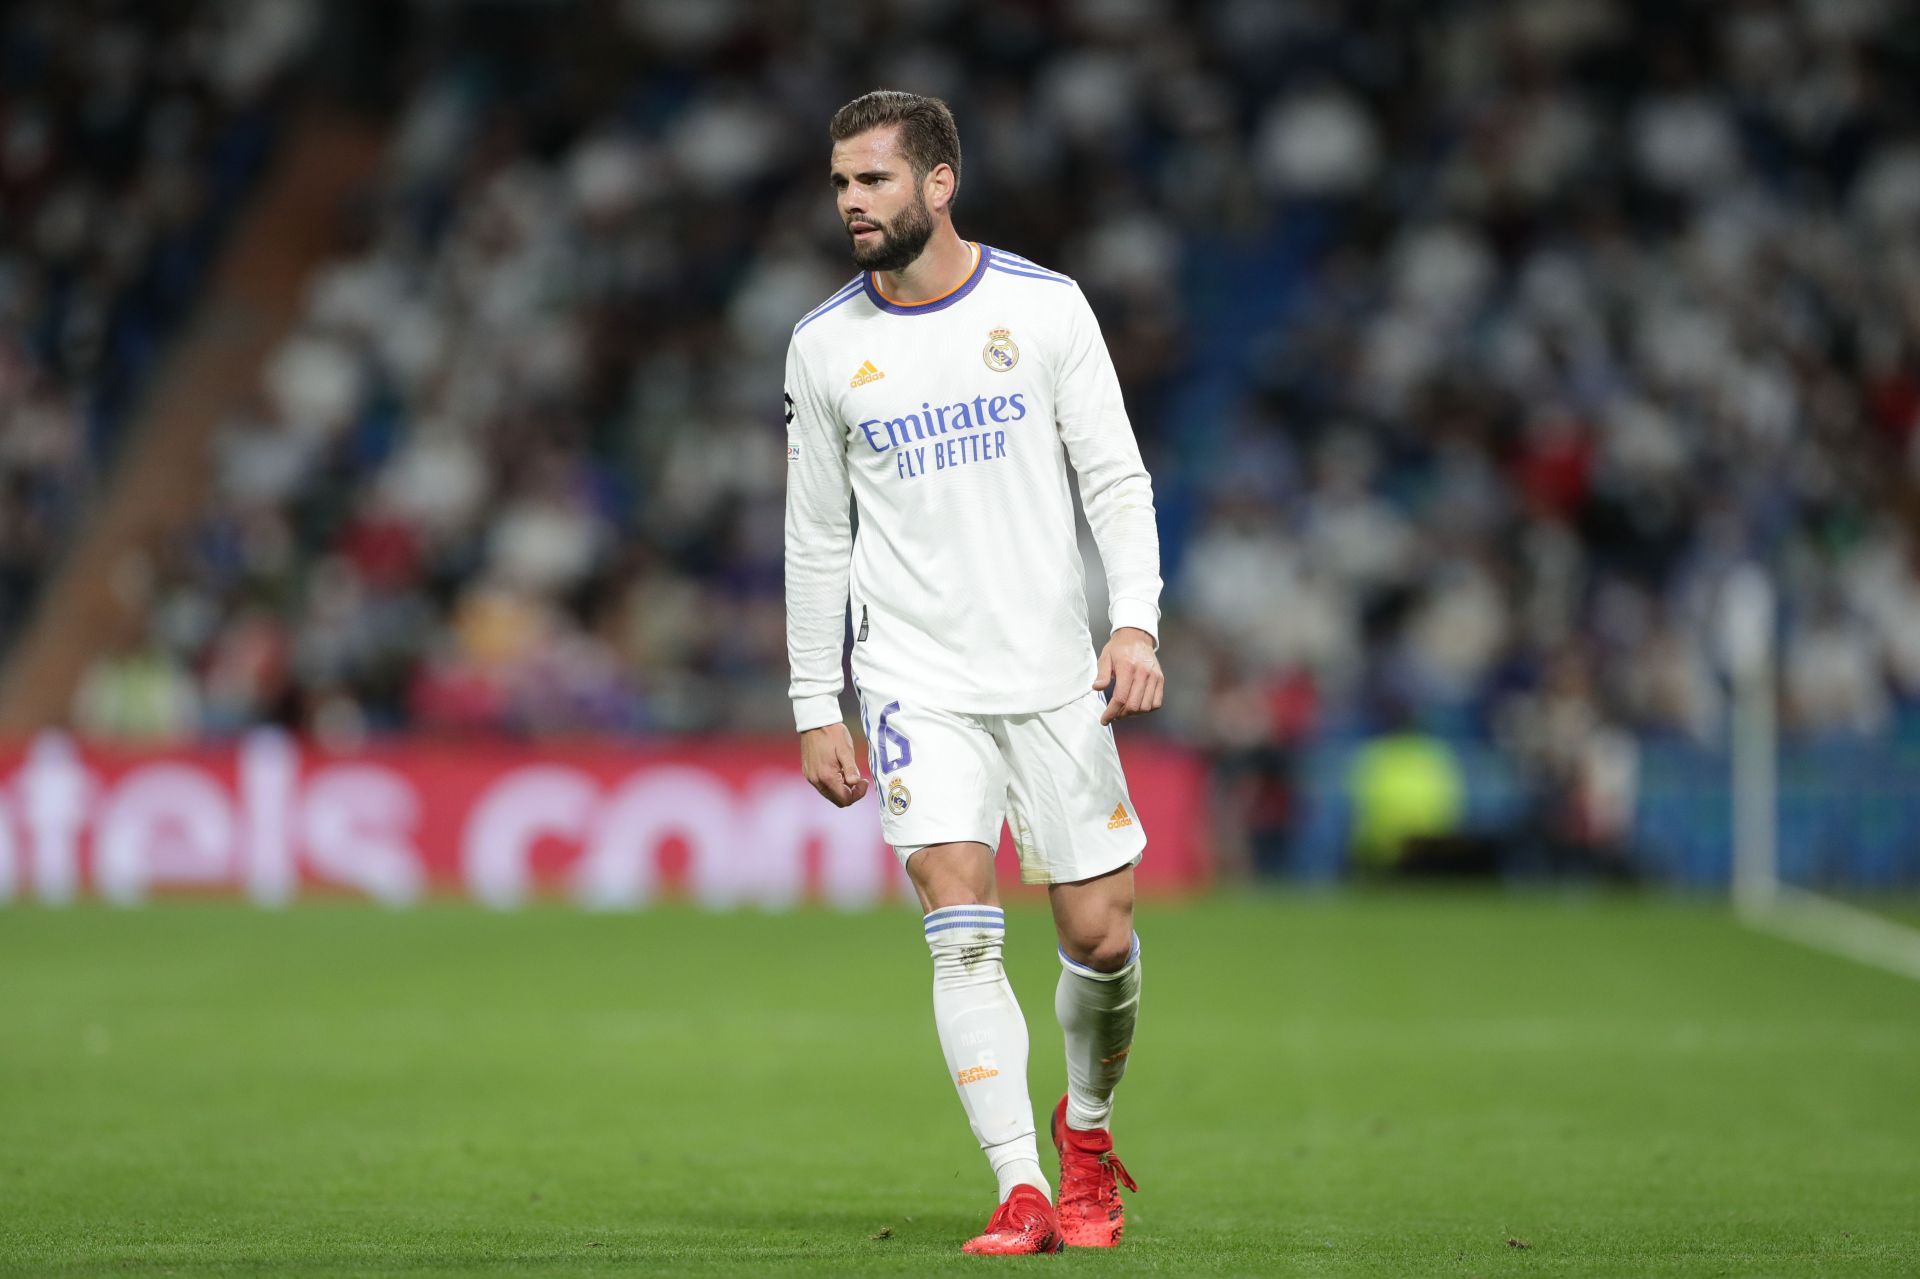 Real Betis have contacted Real Madrid to enquire about the availability of Nacho Fernandez.